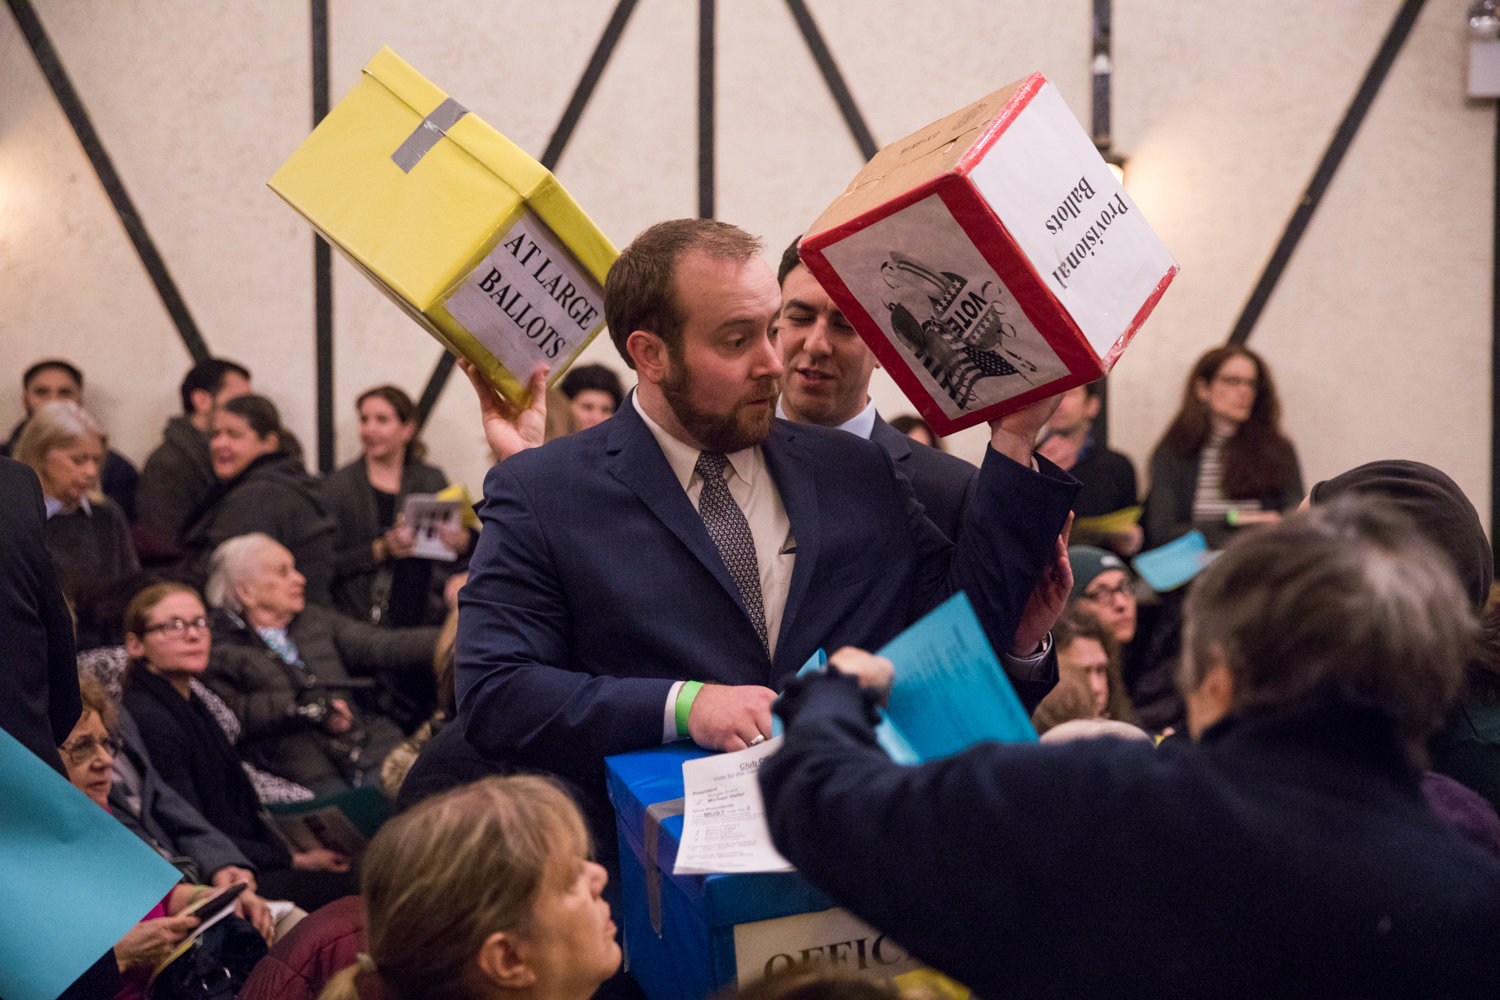 Ivan ‘Duffy’ Nedds, center left, and Eric Dinowitz carry ballot boxes during the Benjamin Franklin Reform Democratic Club’s annual meeting Jan. 29 that saw incumbents win re-election. Both have close connections to Assemblyman Jeffrey Dinowitz — Nedds is a paid staffer in the lawmaker’s district office, while Eric is his son, who also is running for city council.